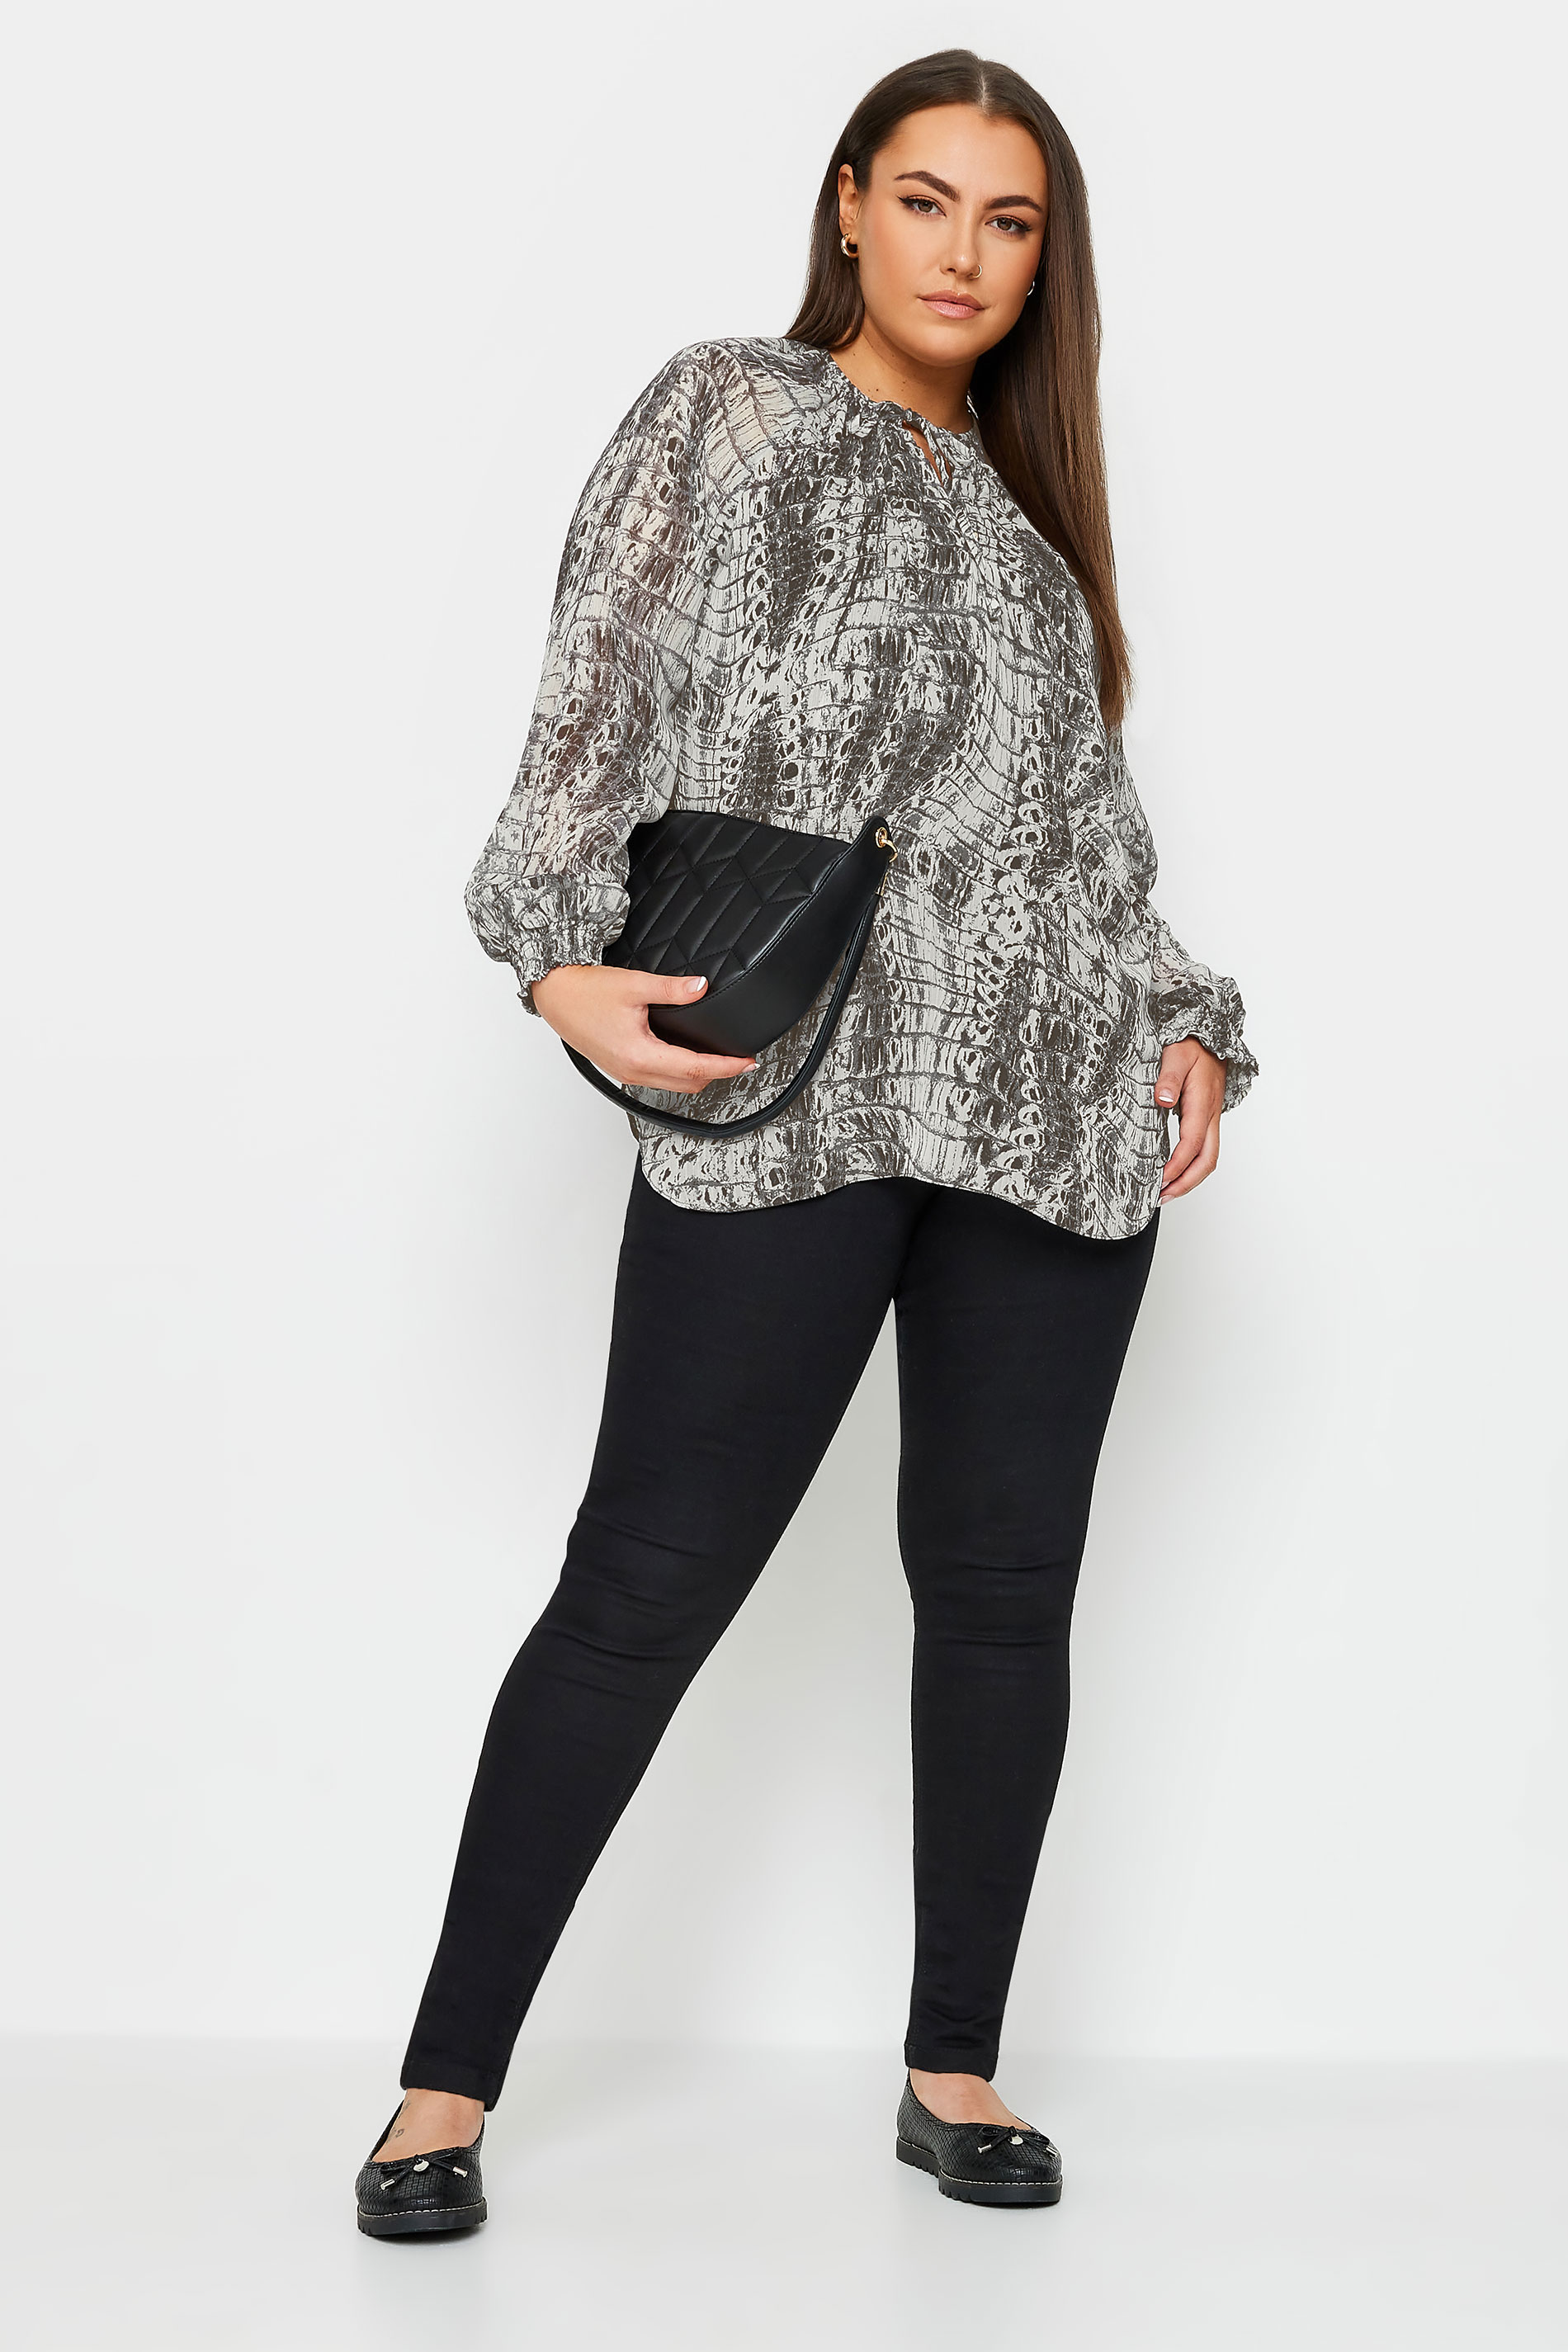 YOURS Plus Size Grey Snake Print Tie Neck Blouse | Yours Clothing 2